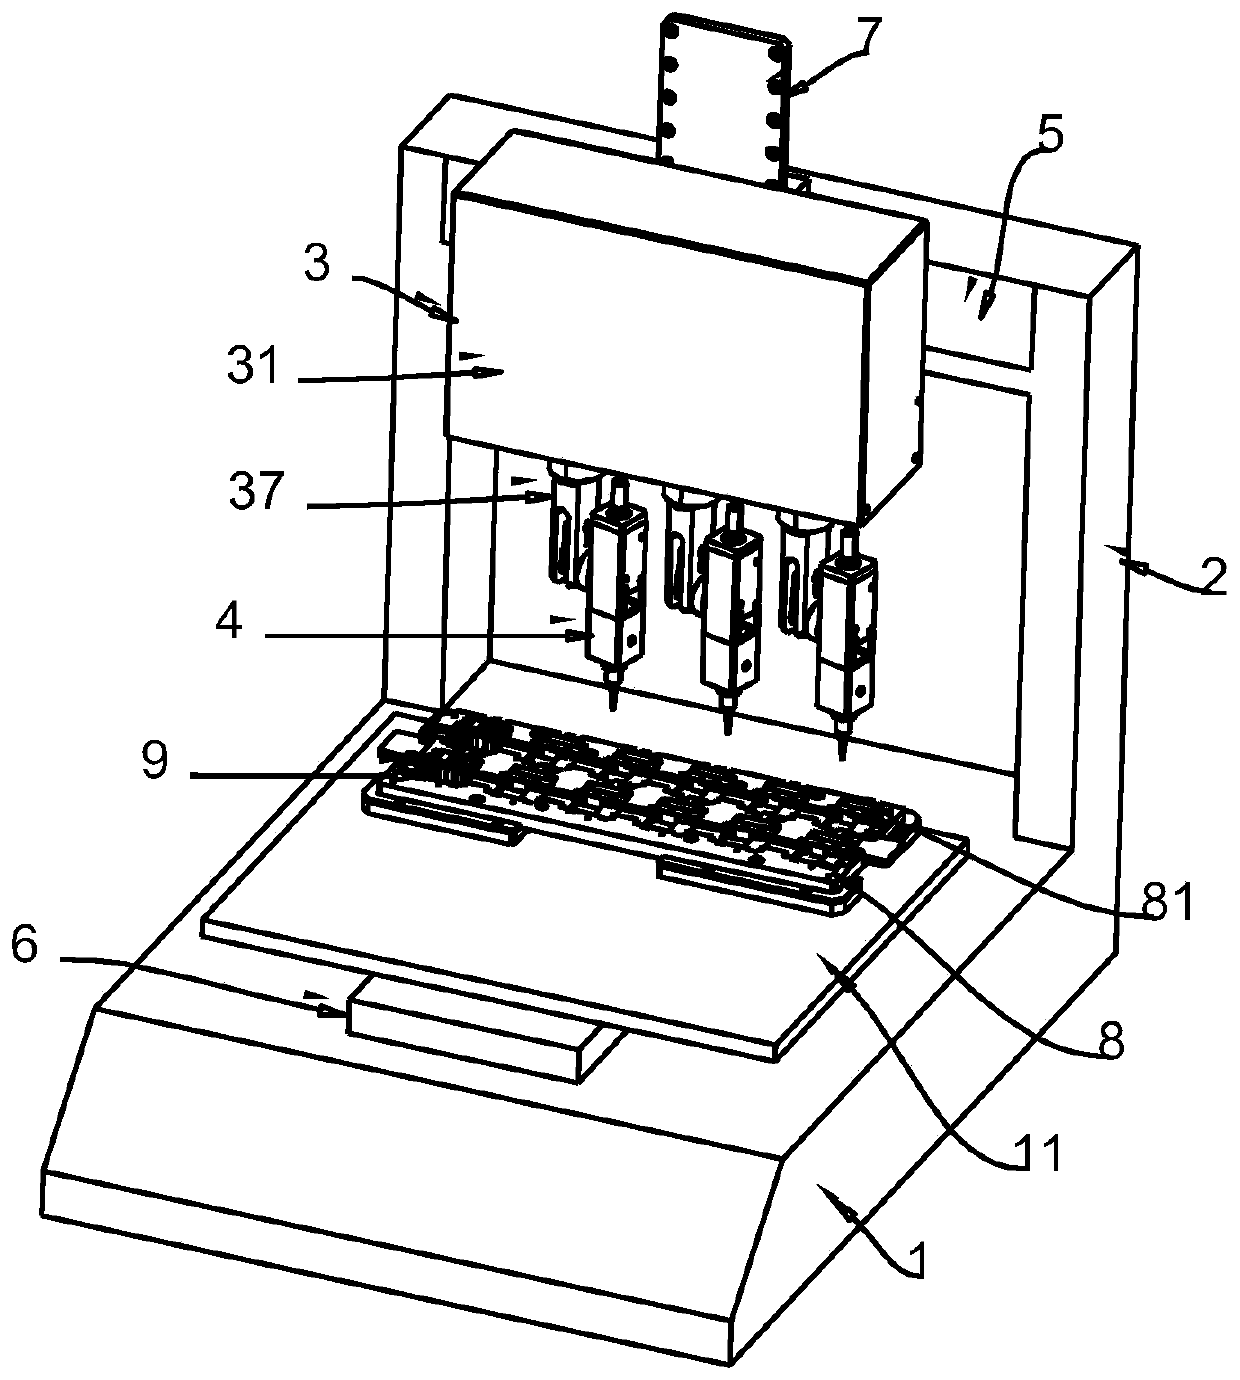 Gluing device for performing multi-angle gluing on PCBA board